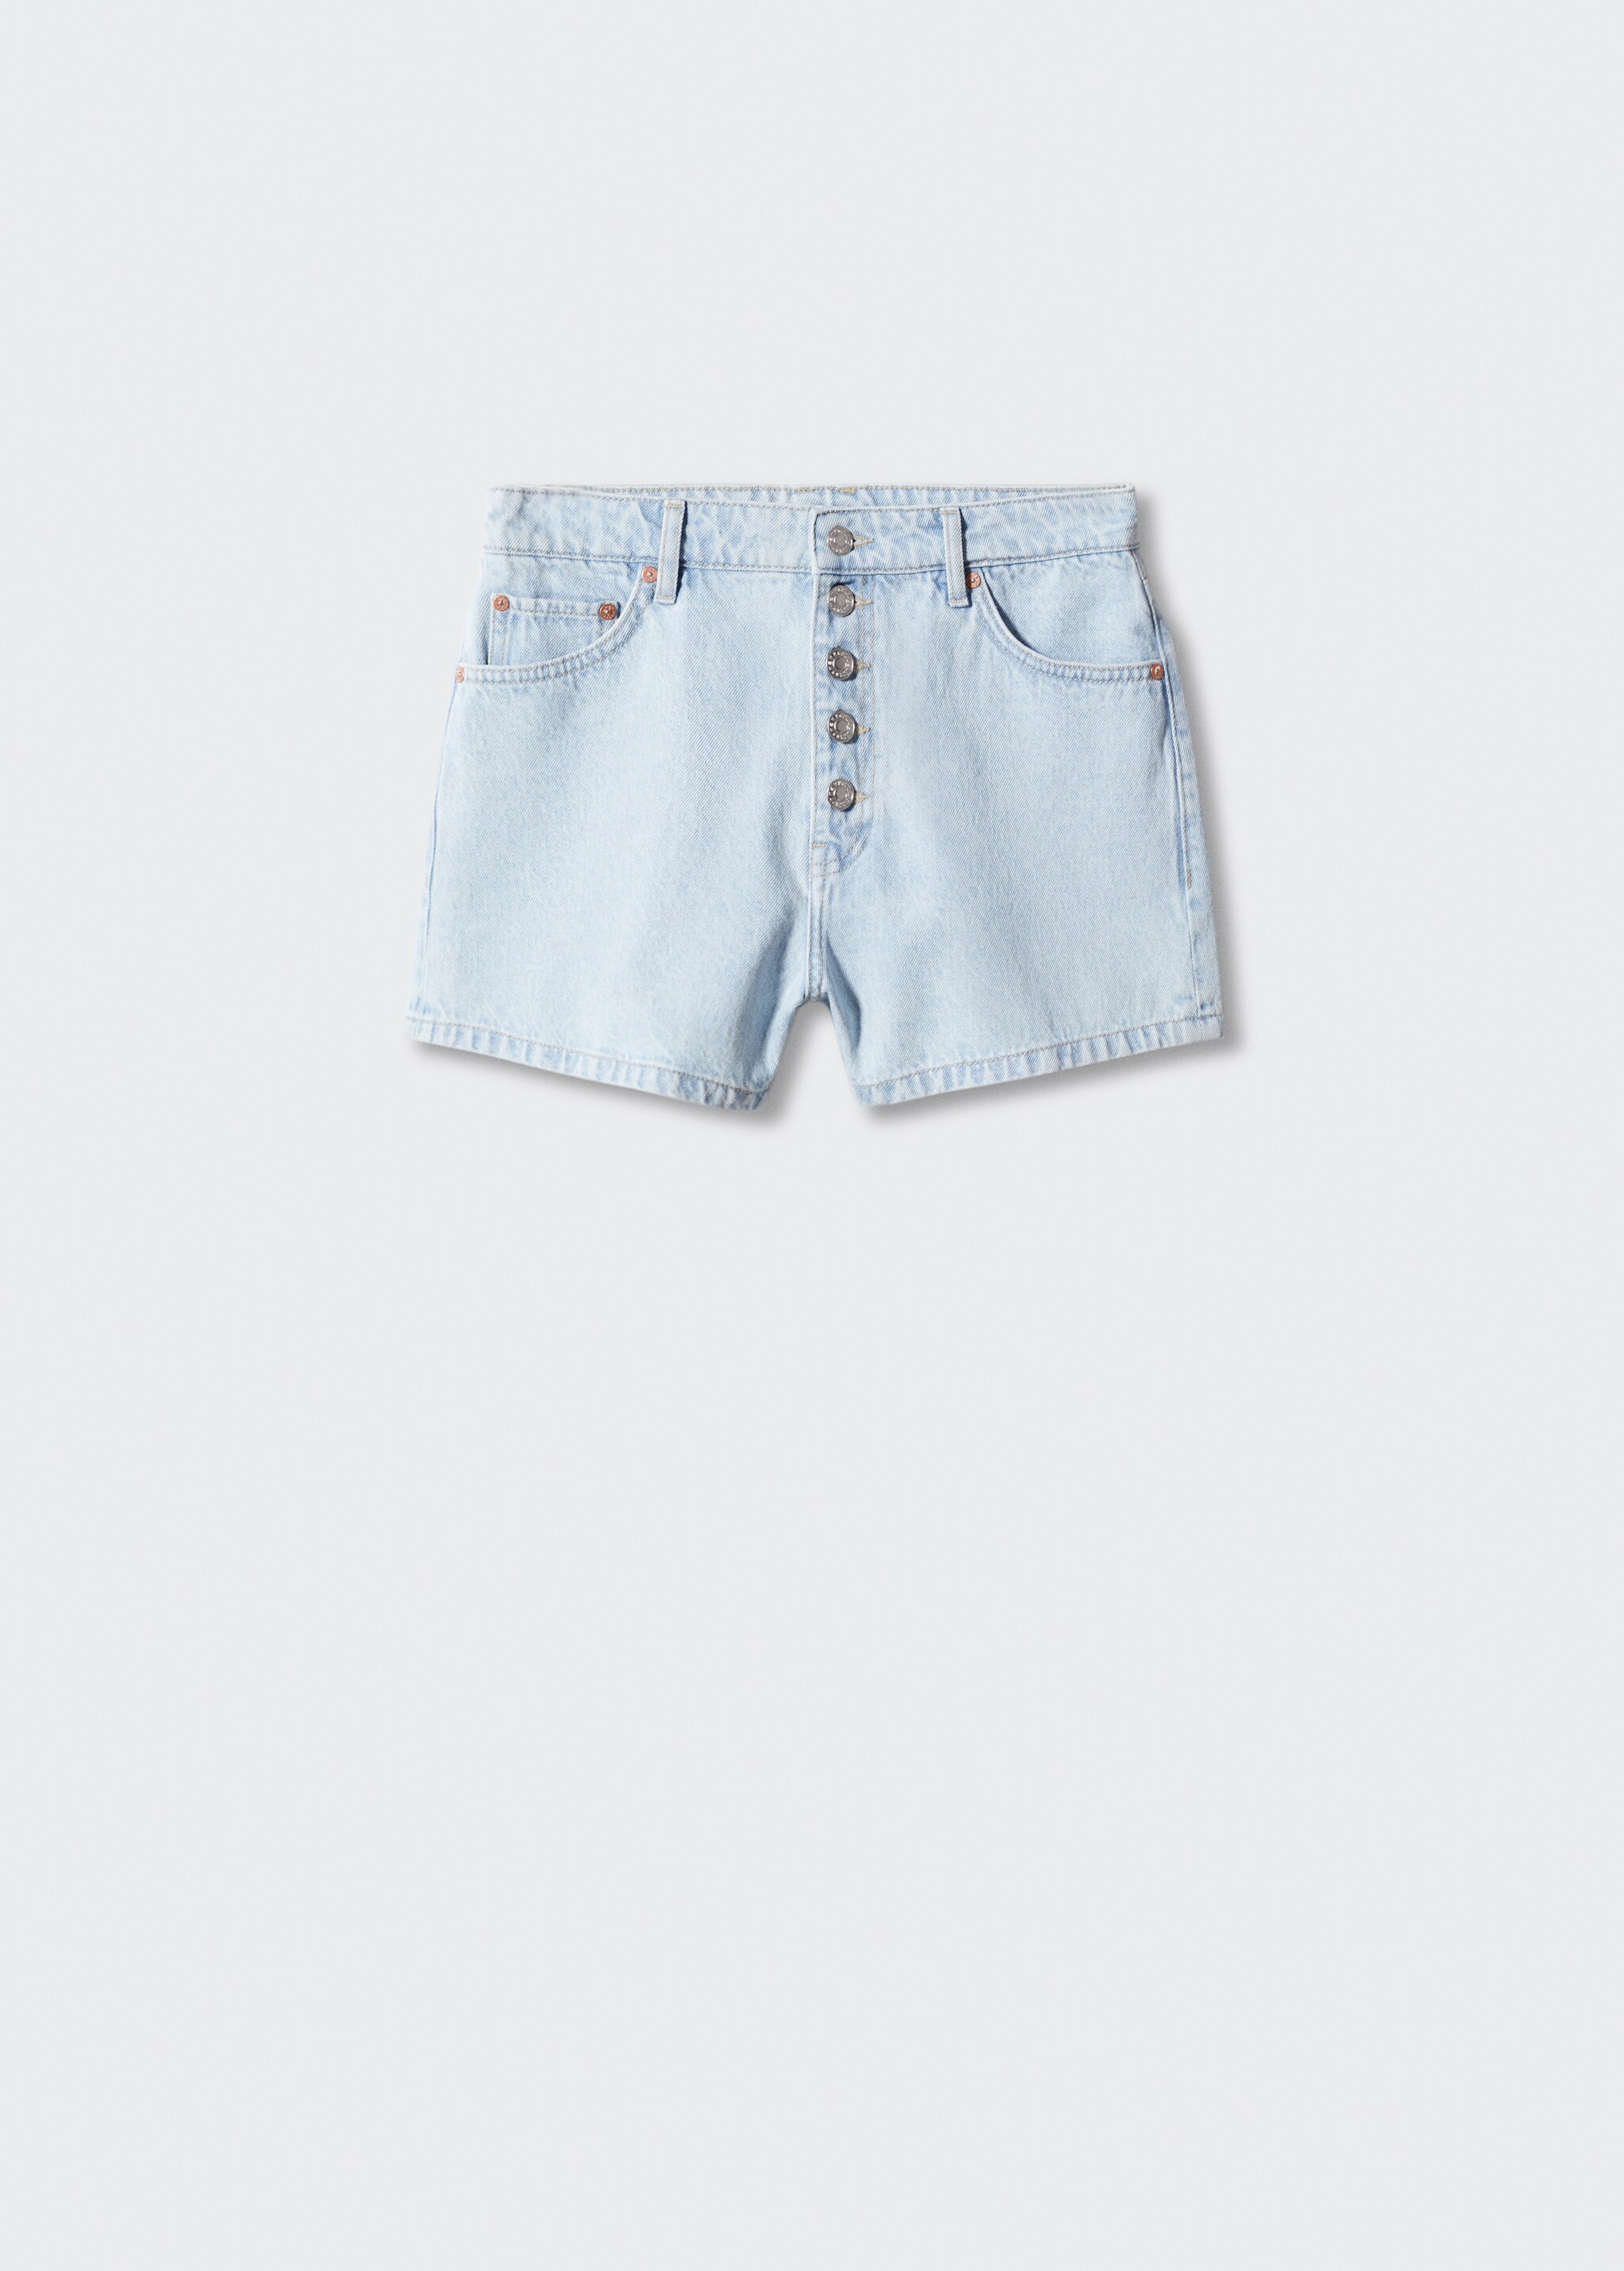 Denim shorts with buttons - Article without model